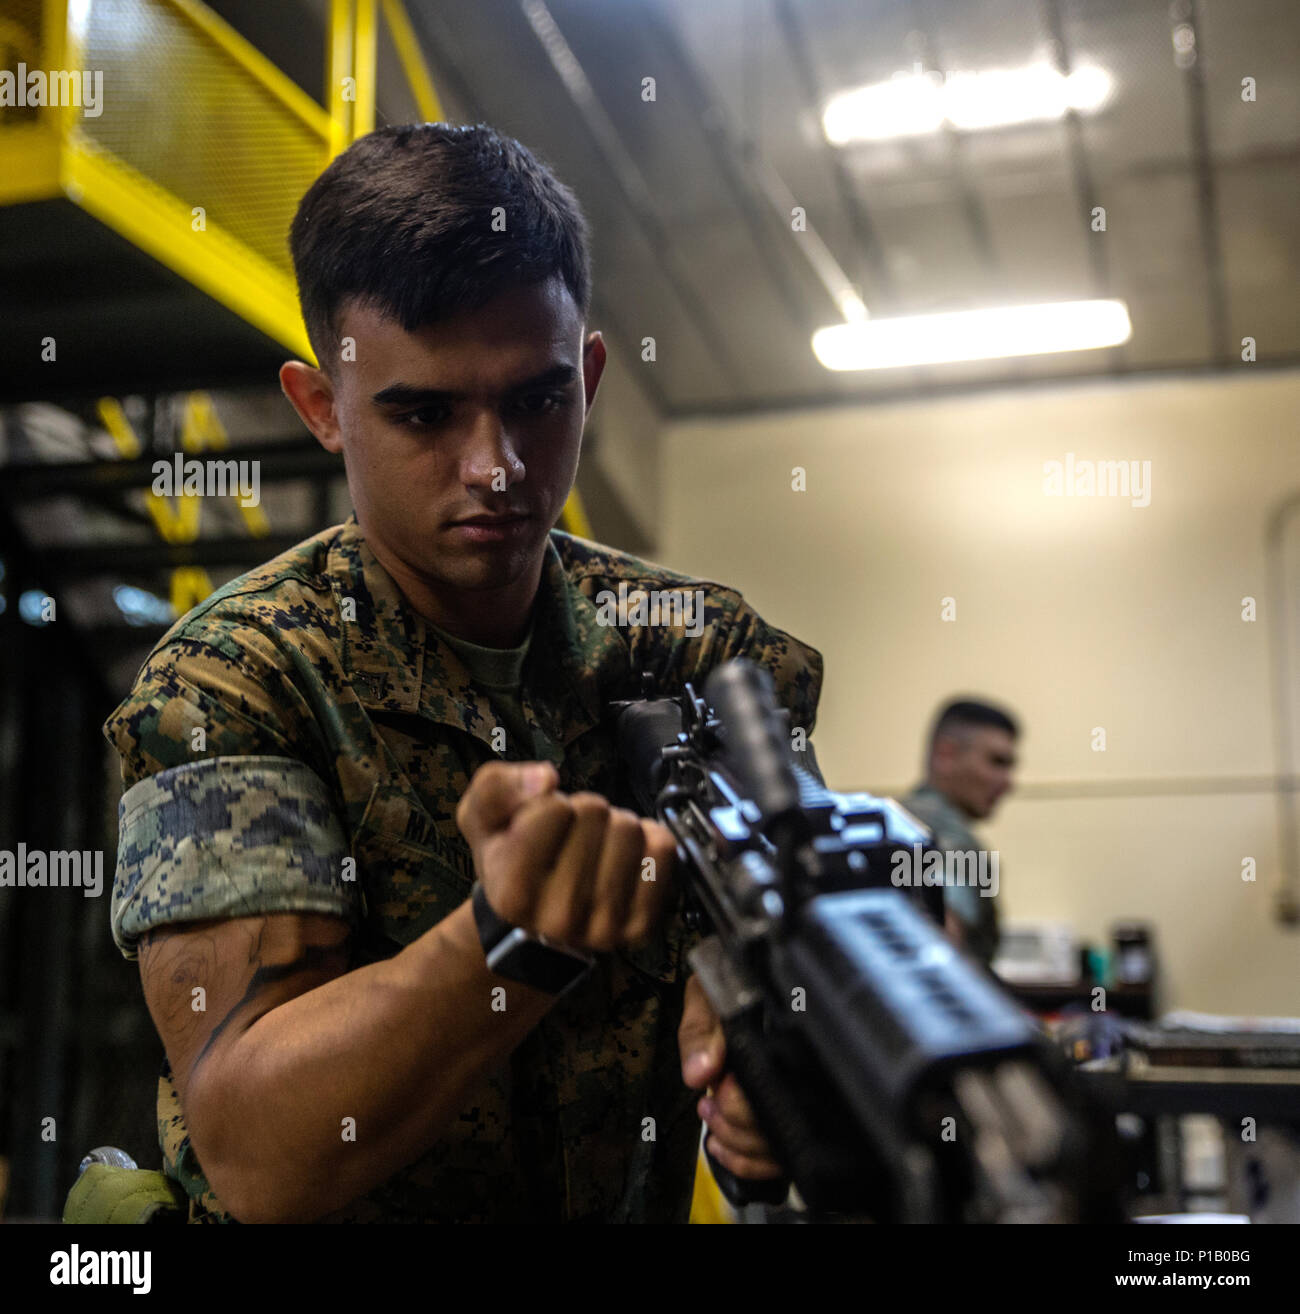 Lance Cpl. Jordan Martinez conducts a functions check on a M240B medium machine gun at III Marine Expeditionary Force Headquarters Group armory, on Camp Hansen, Okinawa, Japan, October 12, 2016. Martinez repairs, inspects and maintains all weapons to ensure combat readiness. A big part of the Marine Corps is weapons maintenance and accountability. Martinez, from Pepperell, Massachusetts, is a small arms repair technician for III MHG, III Marine Expeditionary Force.  (U.S. Marine Corps photo by Cpl. Jessica Etheridge / Released) Stock Photo